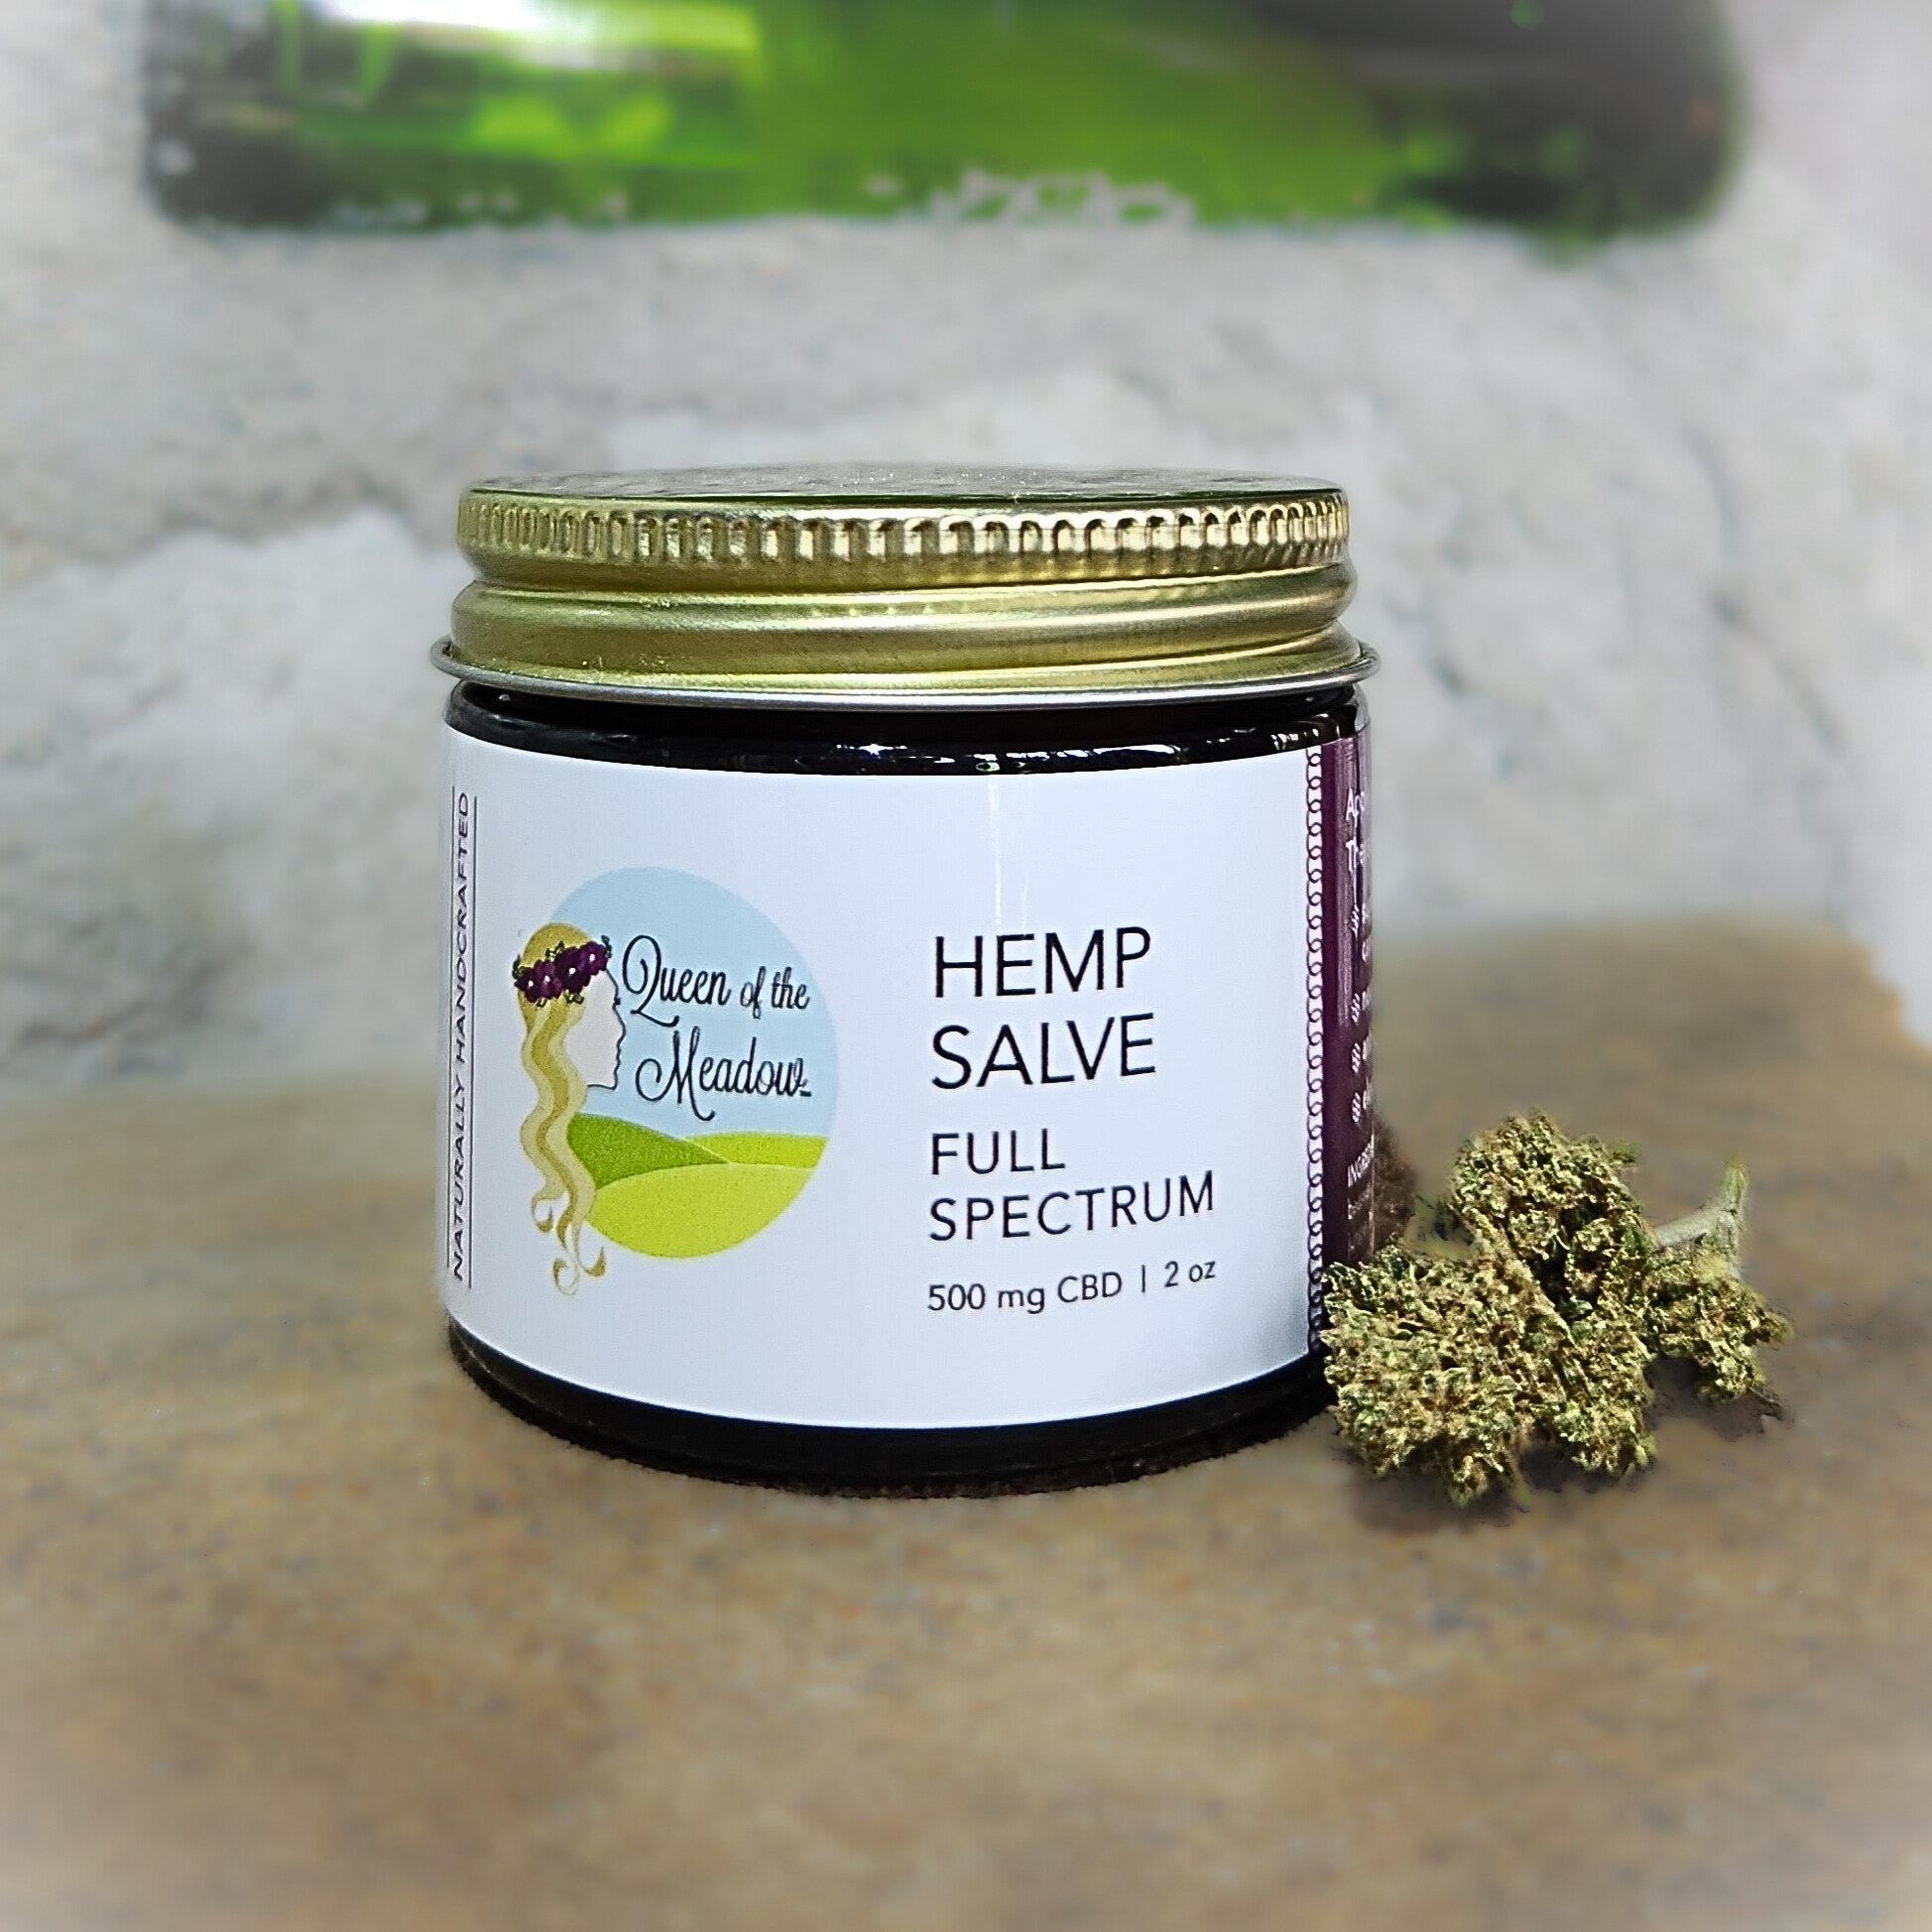 Full spectrum Hemp Salve with 500mg CBD specifically formulated as a natural, topical salve to alleviate pain.  Click image for more information.